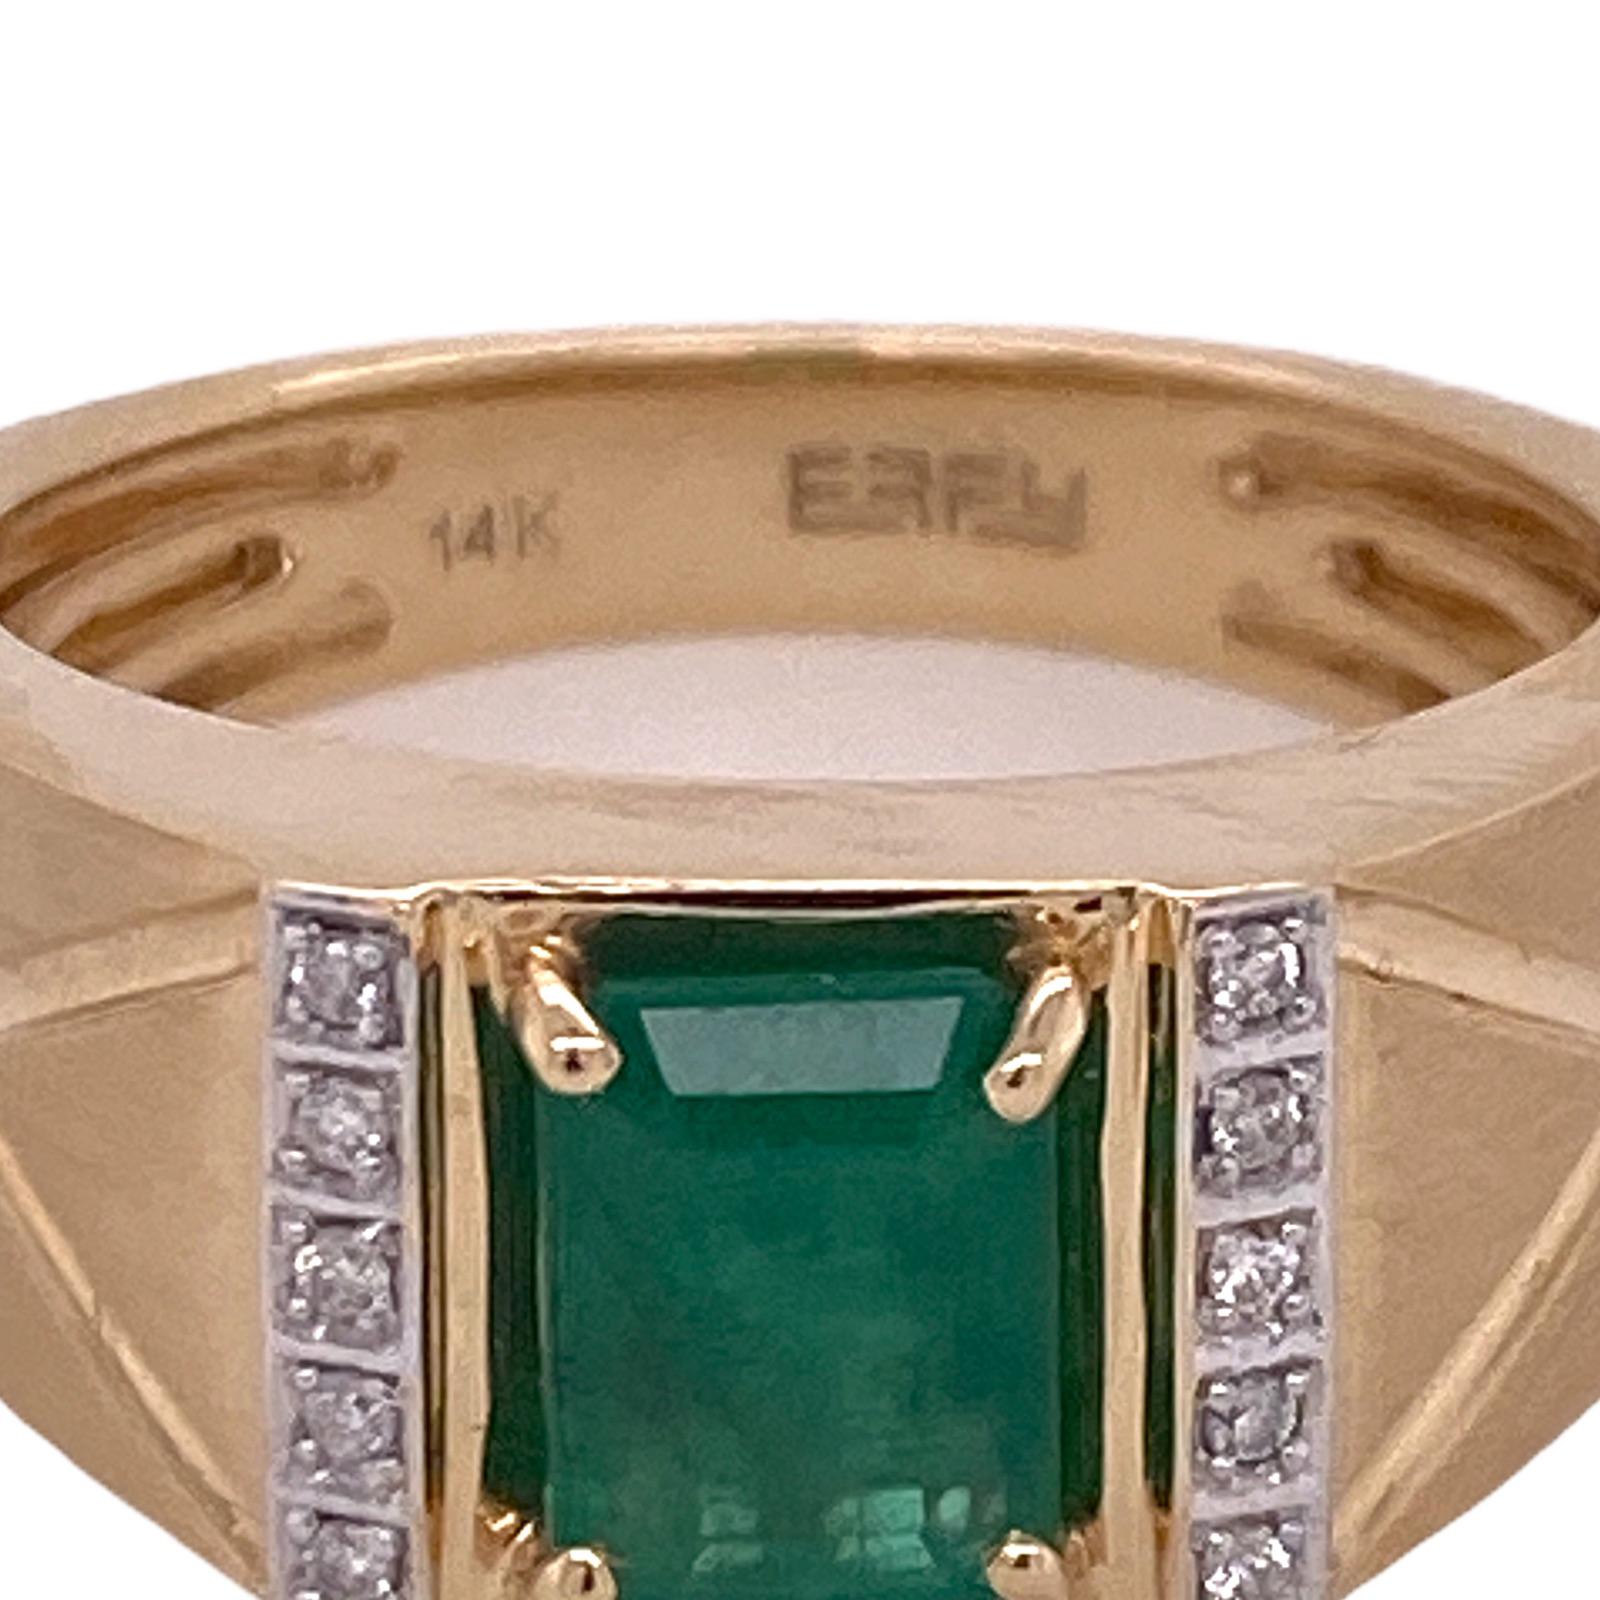 Effy men's emerald diamond ring fashioned in 14 karat yellow gold. The emerald cut emerald weighs approximately 2.00 carats,and the surrounding 10 round brilliant cut diamonds weigh approximately .10 carat total weight. The ring is currently size